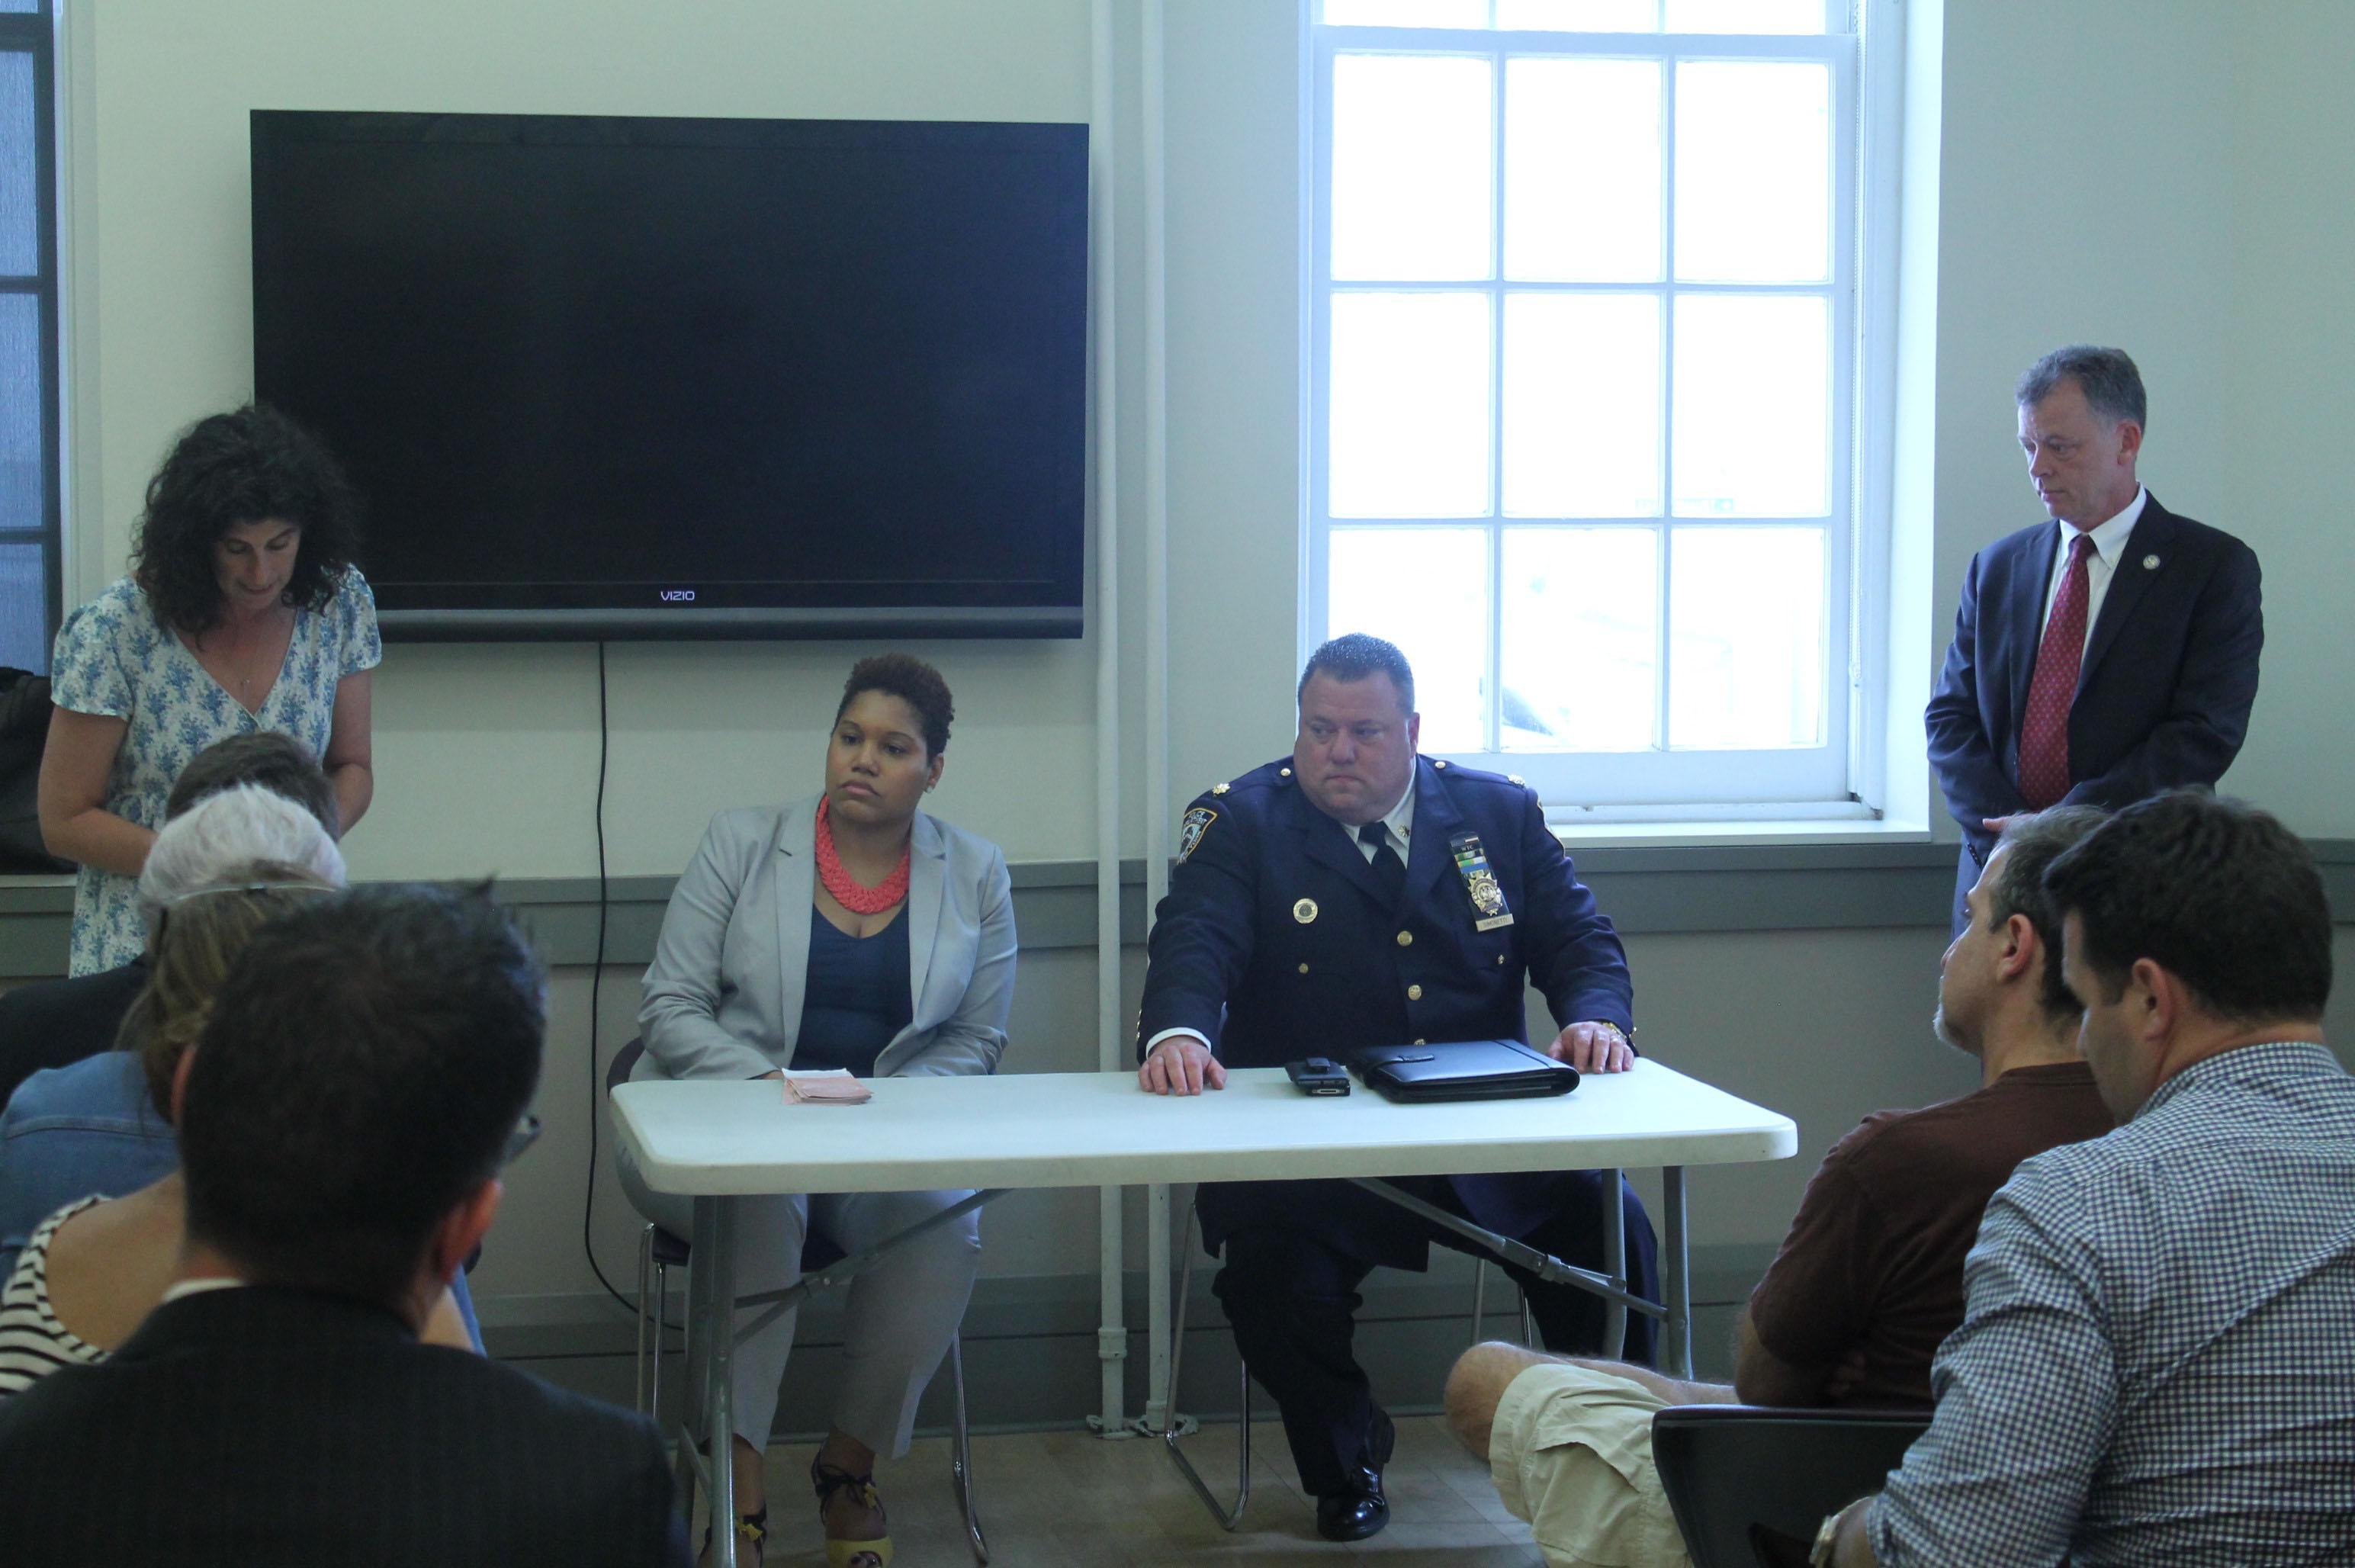 From left, P.S. 41 parent Heather Campbell; Raniece Medley, C.C.R.B. outreach director; and Deputy Inspector Joseph Simonetti and Detective Jimmy Alberici, of the Sixth Precinct. Photo by Michael Ossorguine